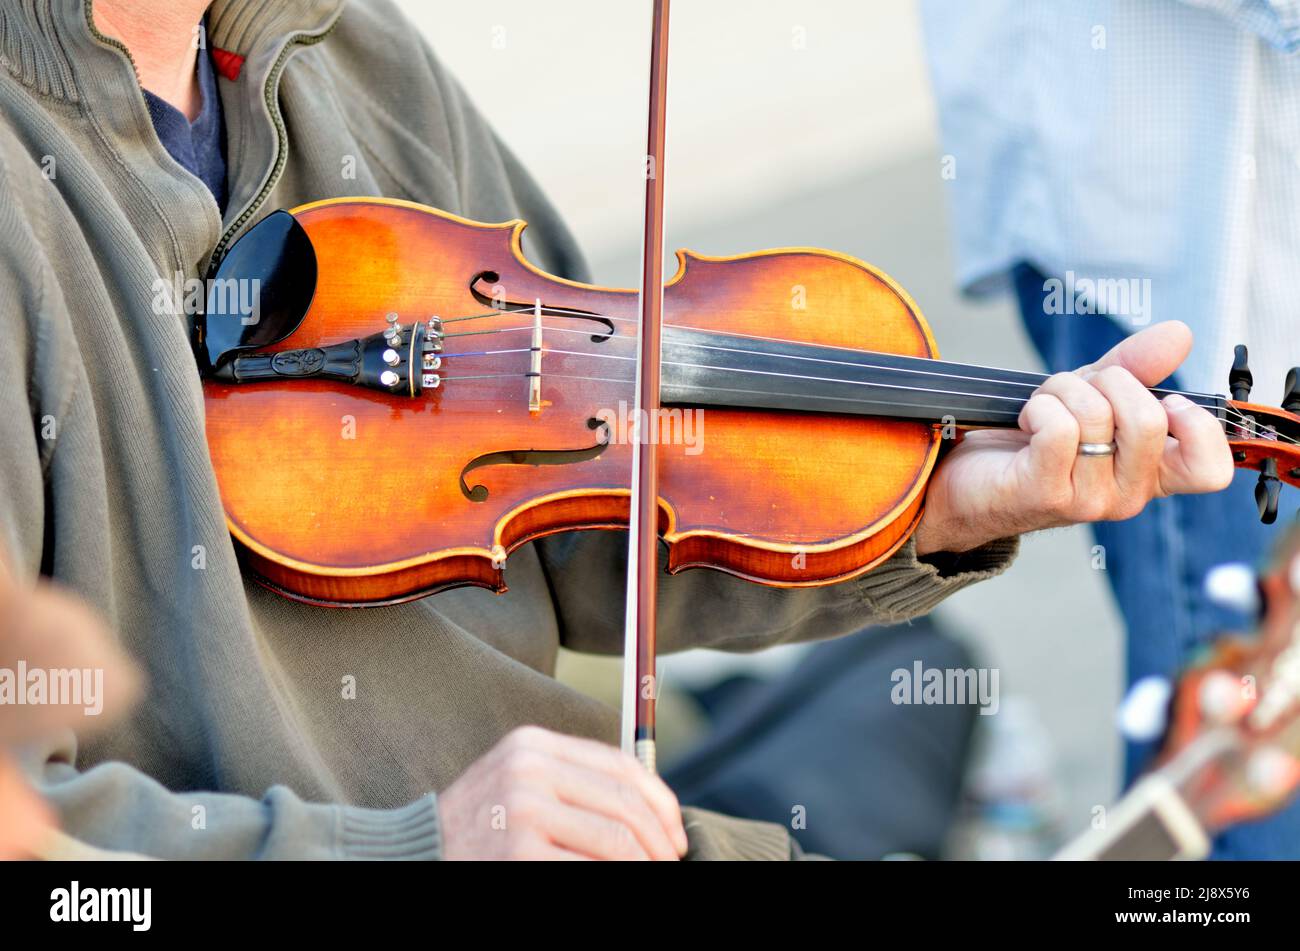 Musicisan plays a fiddle at an outdoor festival,  using a bow and changing tones with fingers on the strings. Stock Photo